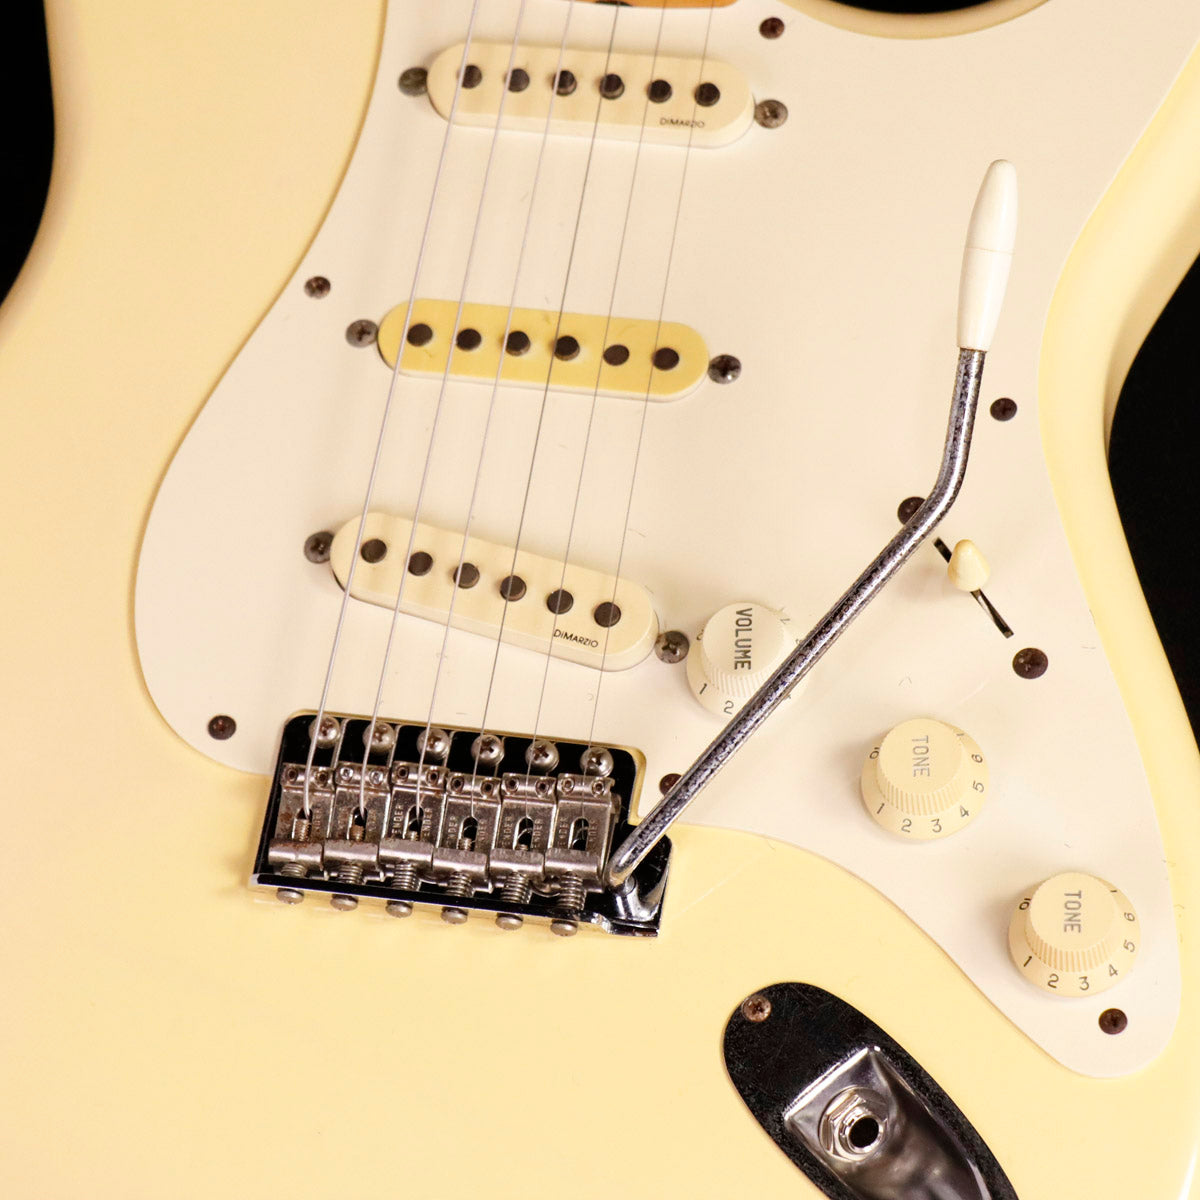 [SN MIJ S018778] USED Fender Japan / Yngwei Malmsteen Signature ST57-140YM Yellow White [06]